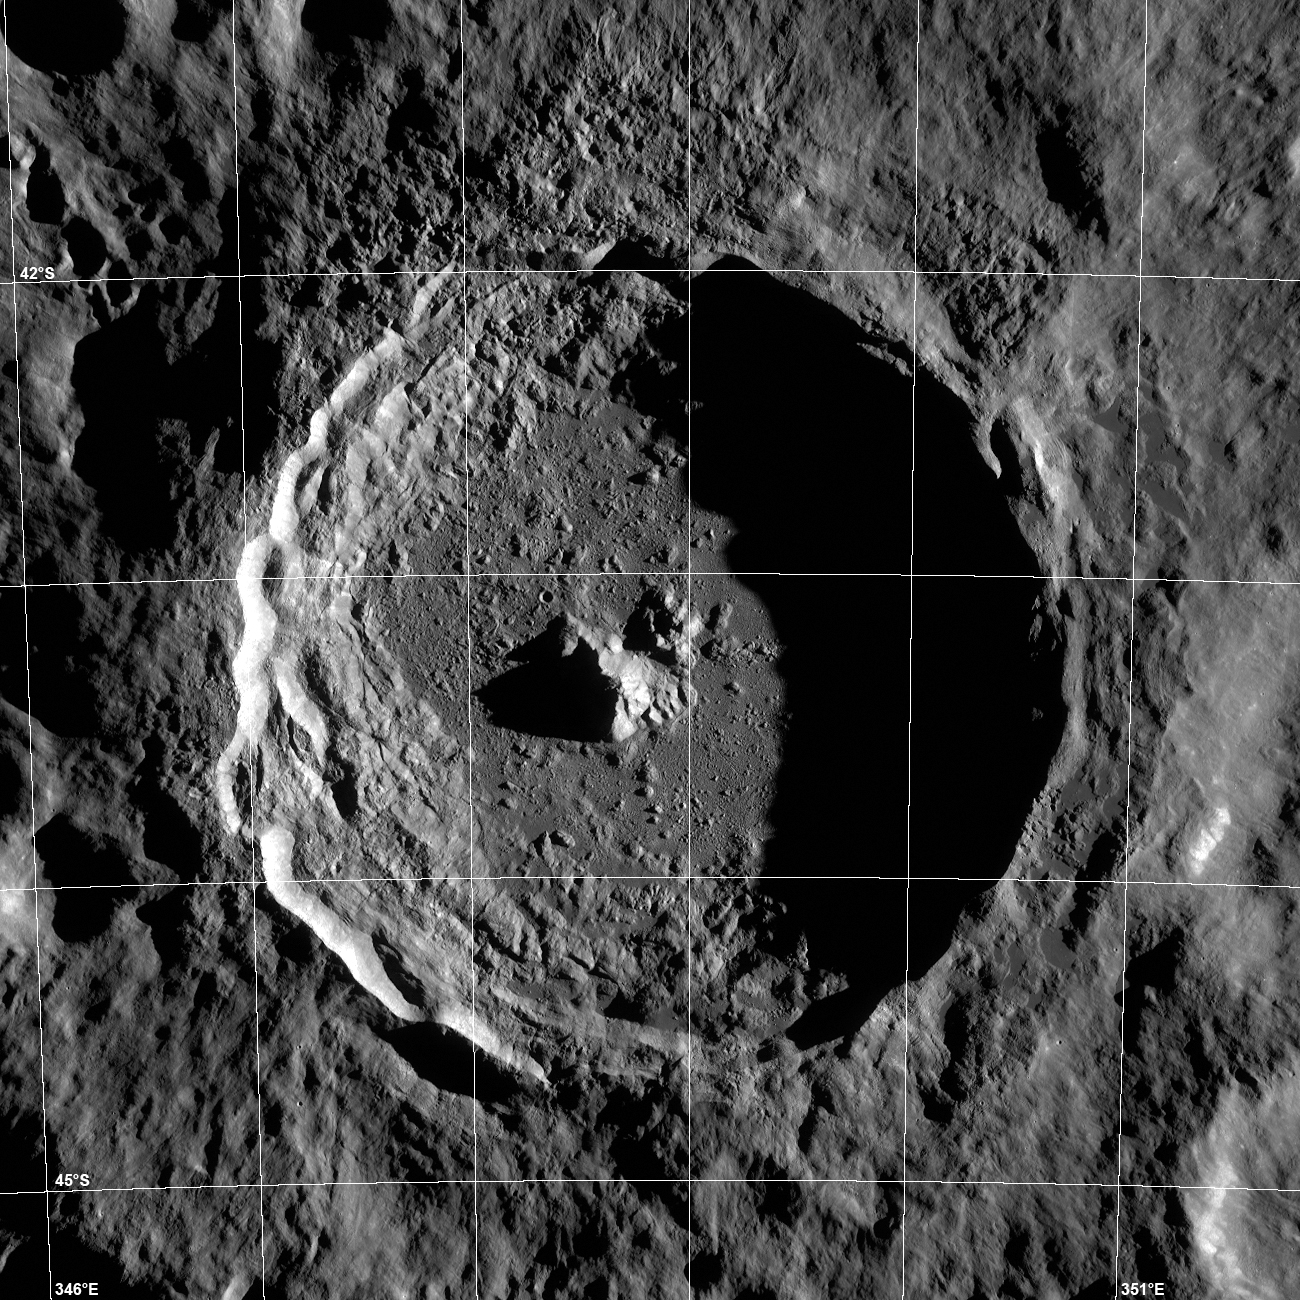 Overhead view of impact crater on the Moon.